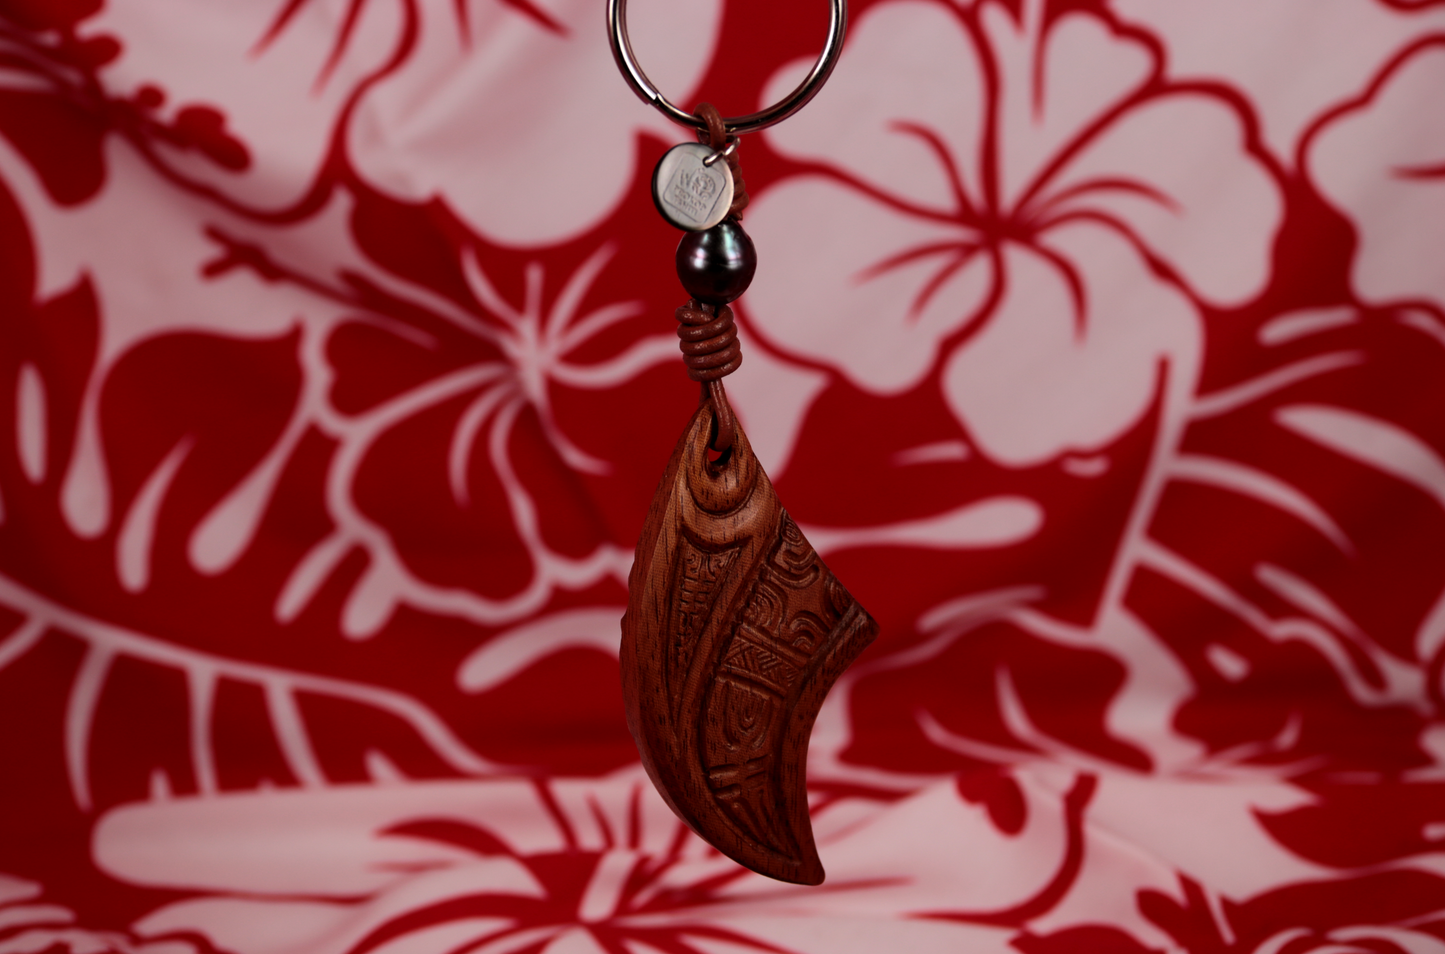 Handmade wooden keychain with maori engraved designs and Tahitian pearl